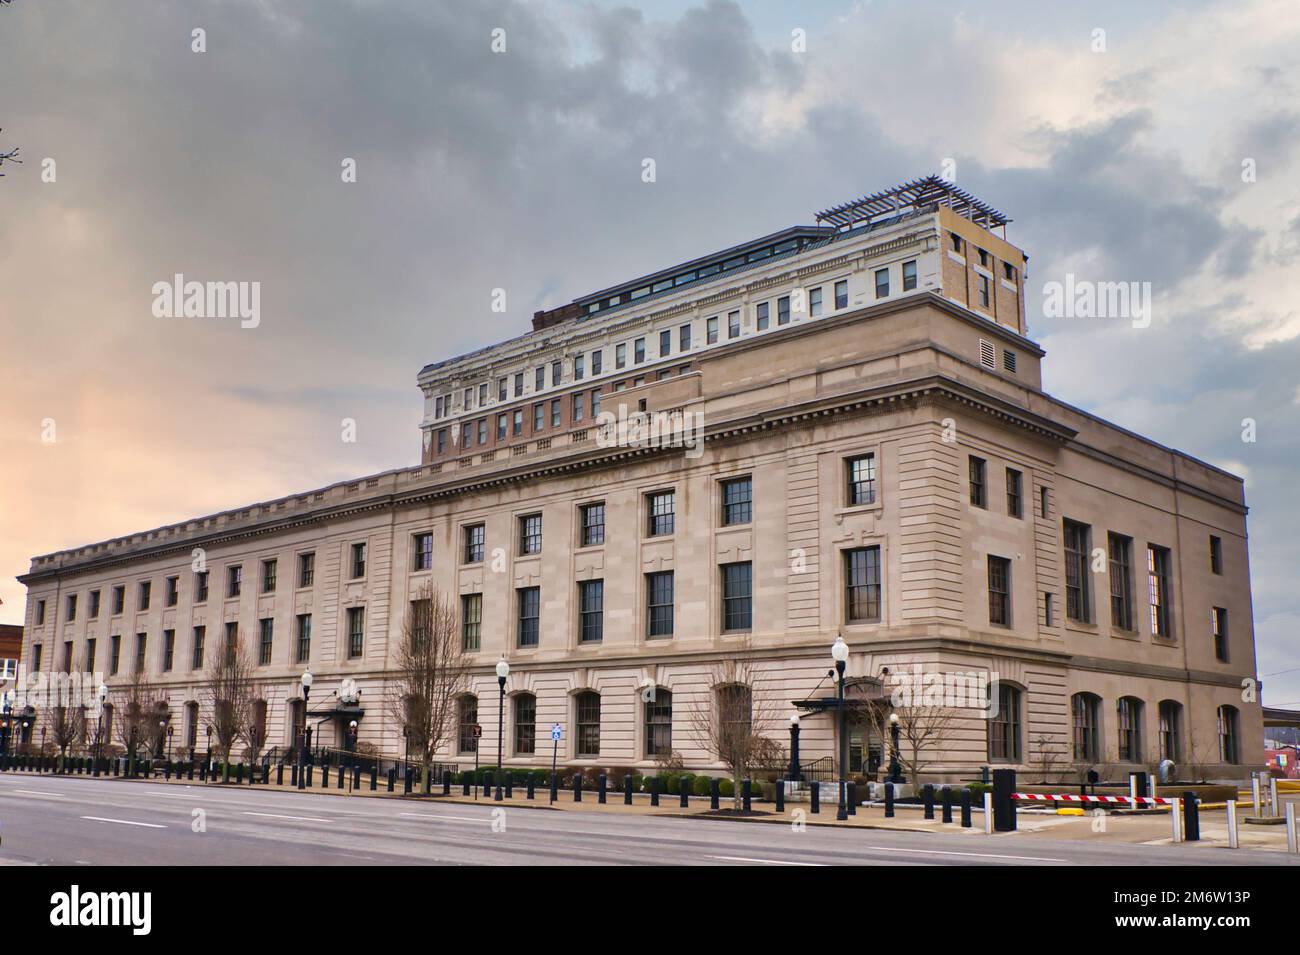 Sydney L. Christie Federal Building and U.S. Courthouse - Huntington, WV Stock Photo